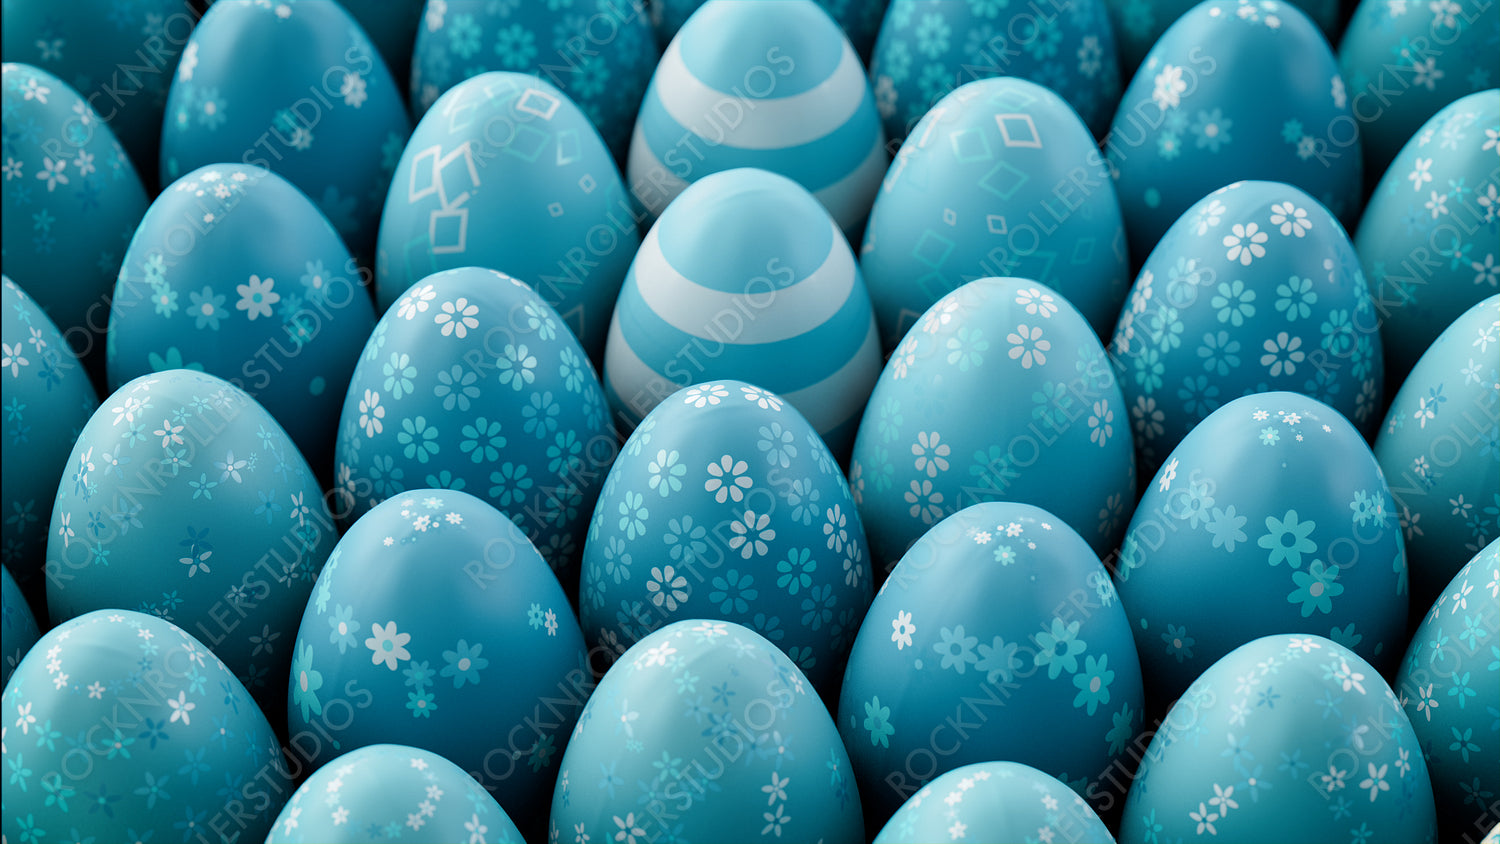 Multicolored, Easter Egg background. Beautiful Teal and White Eggs with Striped, Floral and Diamond patterns. 3D Render